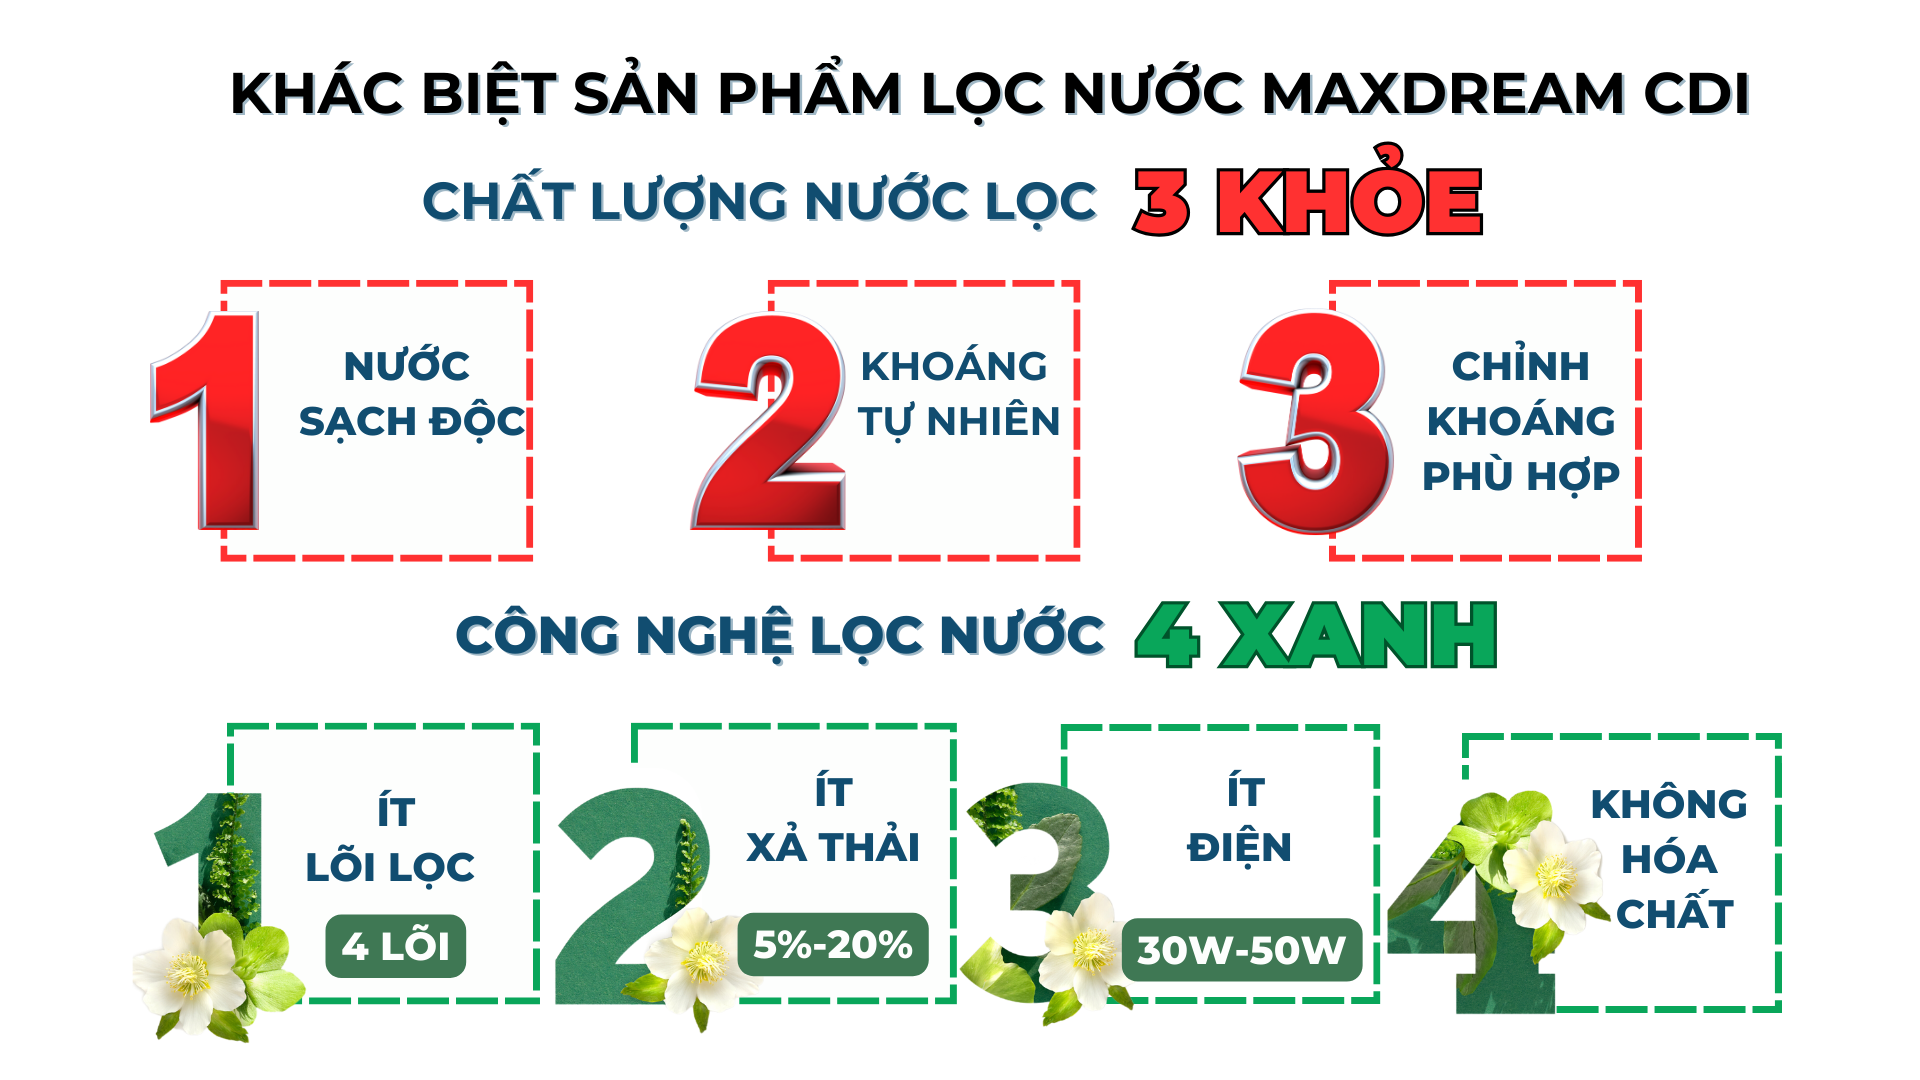 cHAT LUONG NUOC 3 KHOE 4 xanh 1